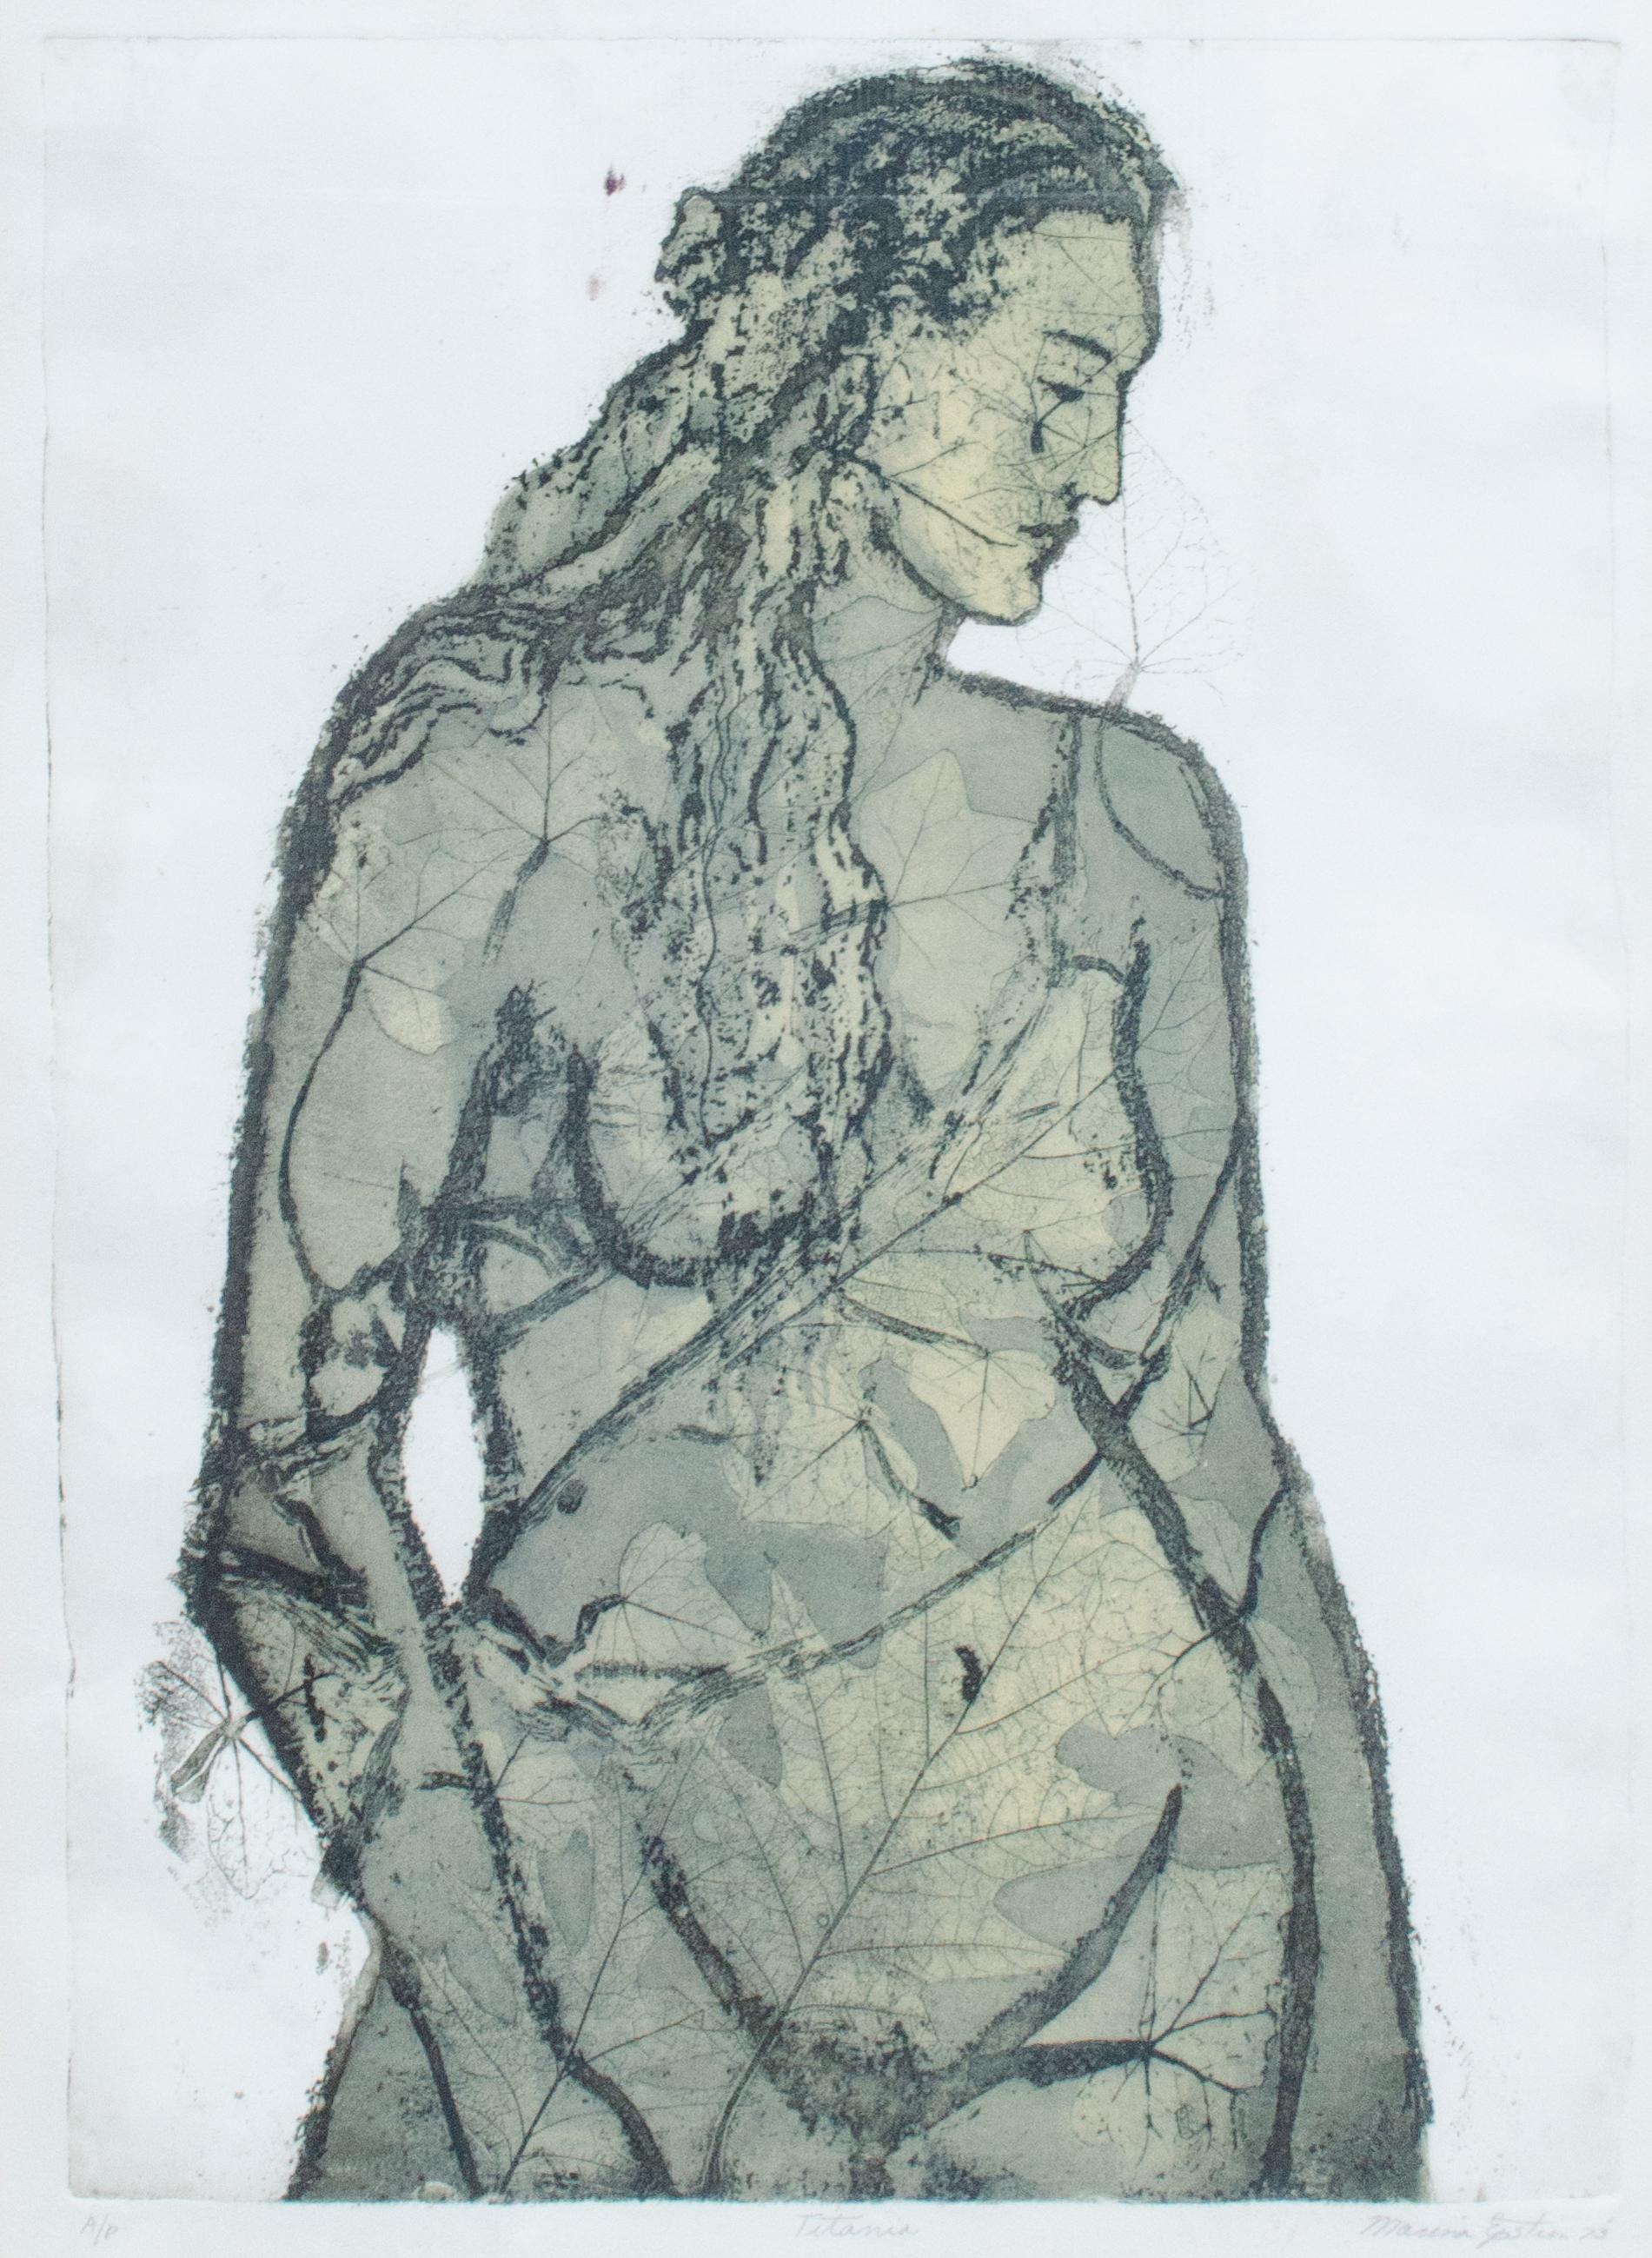 Marion Epstein (American, 1921-2002)
Titania, 1973
Lithograph
Framed: 31 1/2 x 25 x 1/2 in.
Numbered, titled, signed and dated bottom

For over 60 years, local artist Marion Epstein has worked through her art to bridge the personal and the